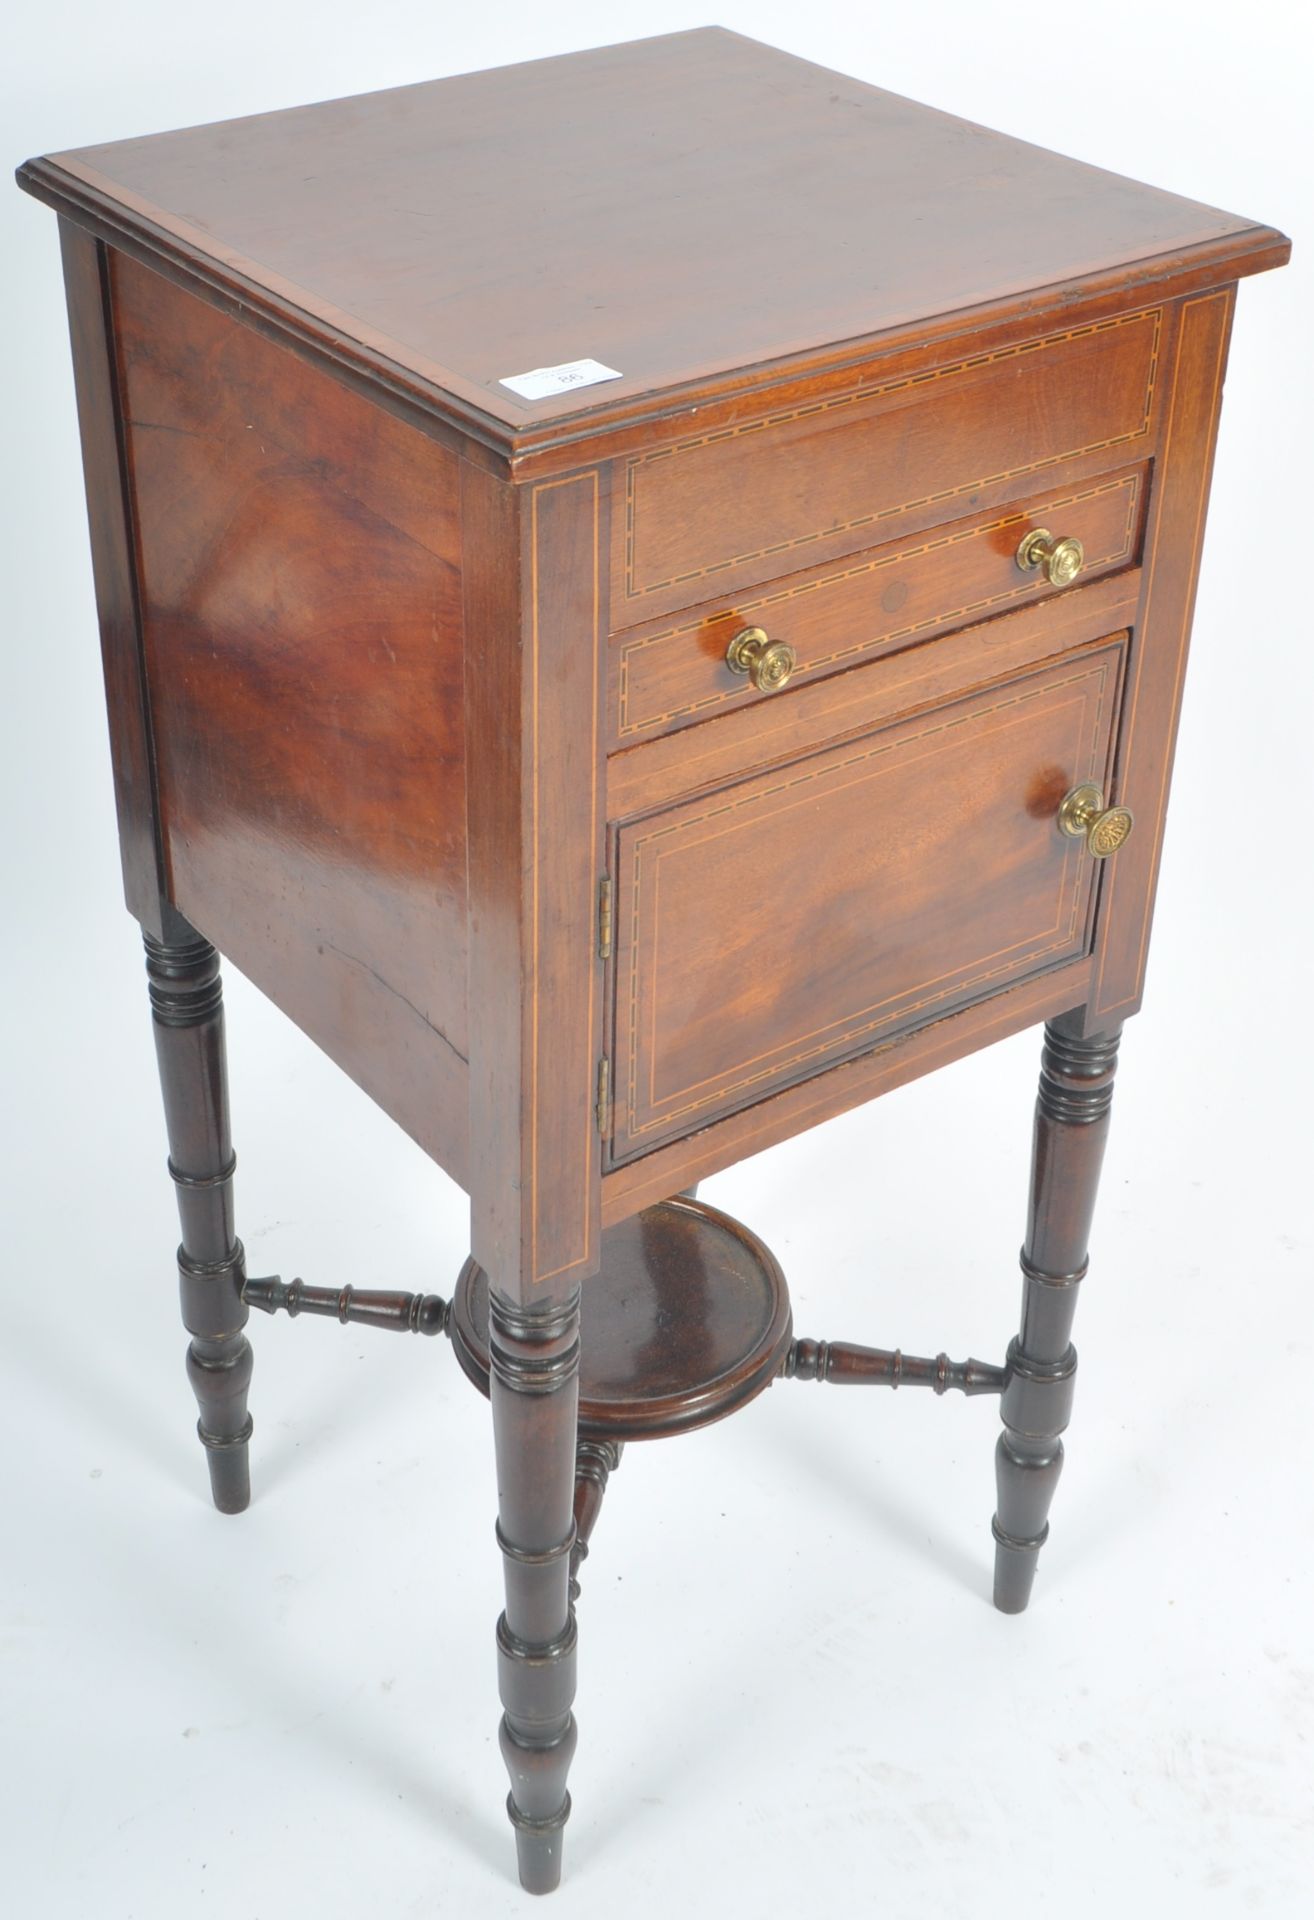 LATE 19TH CENTURY VICTORIAN POT CUPBOARD - Image 2 of 6